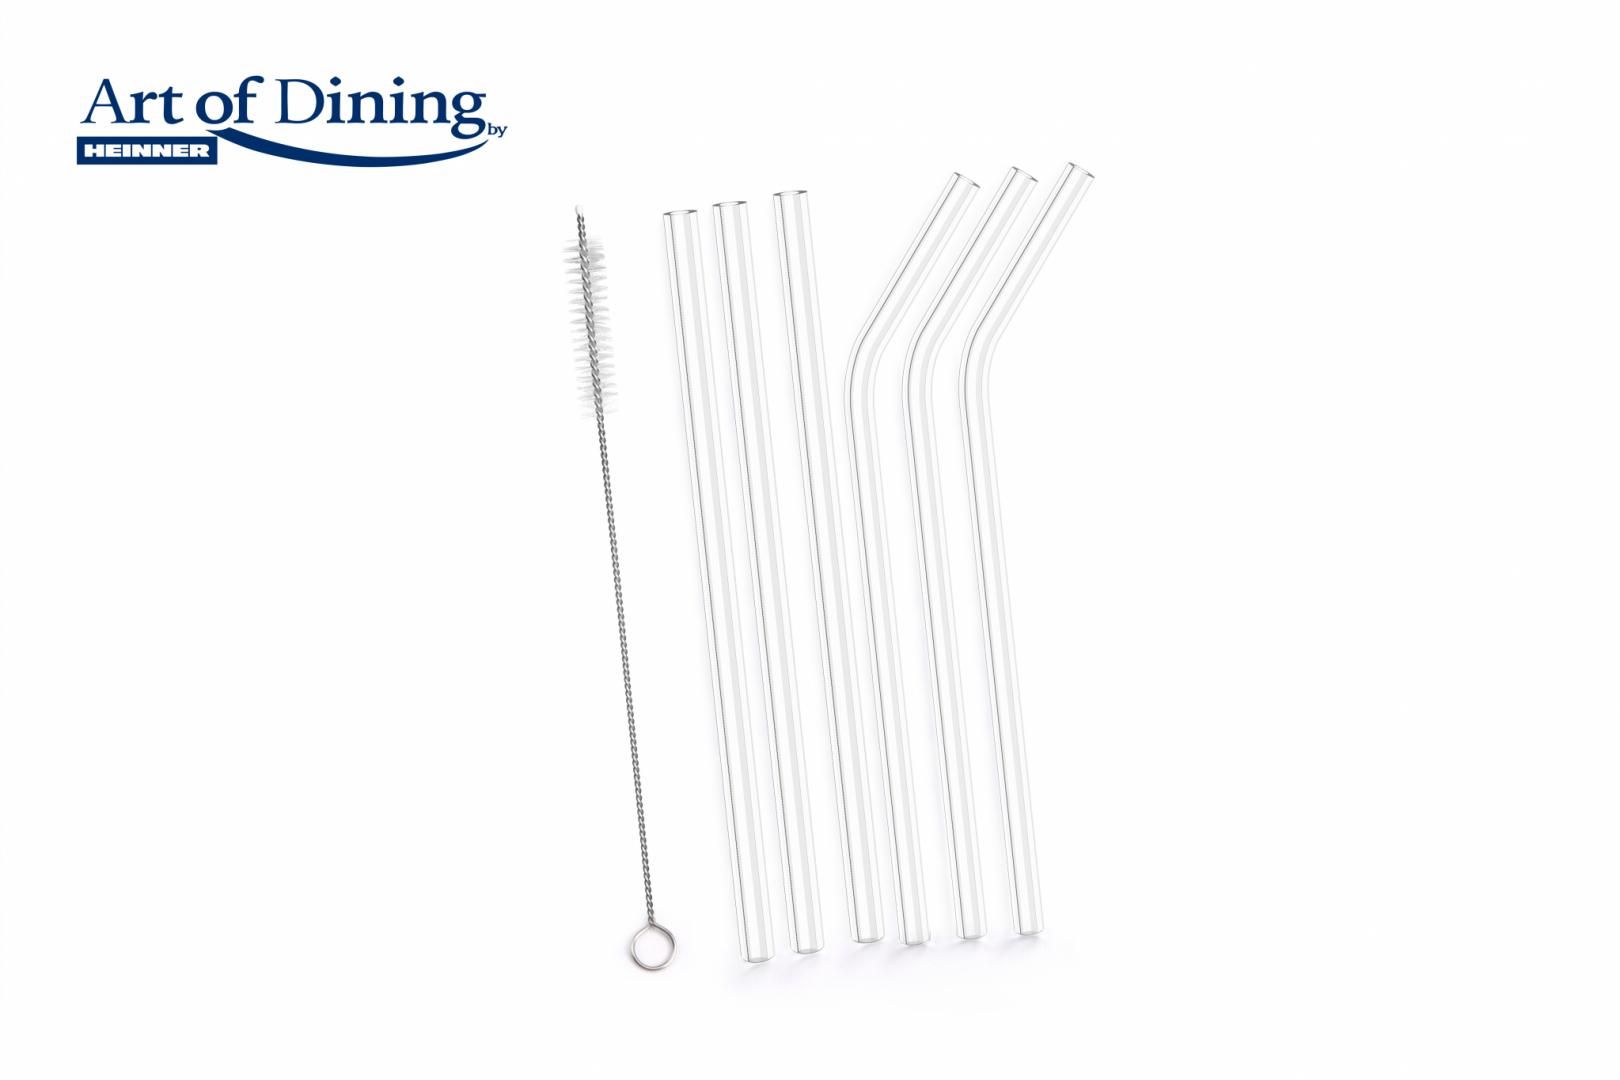 SET OF 6 STRAWS MADE OF GLASS + BRUSH FOR CLEANING the set contains: : 3 x straight straw + 3 x bent straw + 1 x brush for cleaning Sizes:200*8mm Weight / straw : 14.5g Material thickness:1.5 mm Color: transparent_2